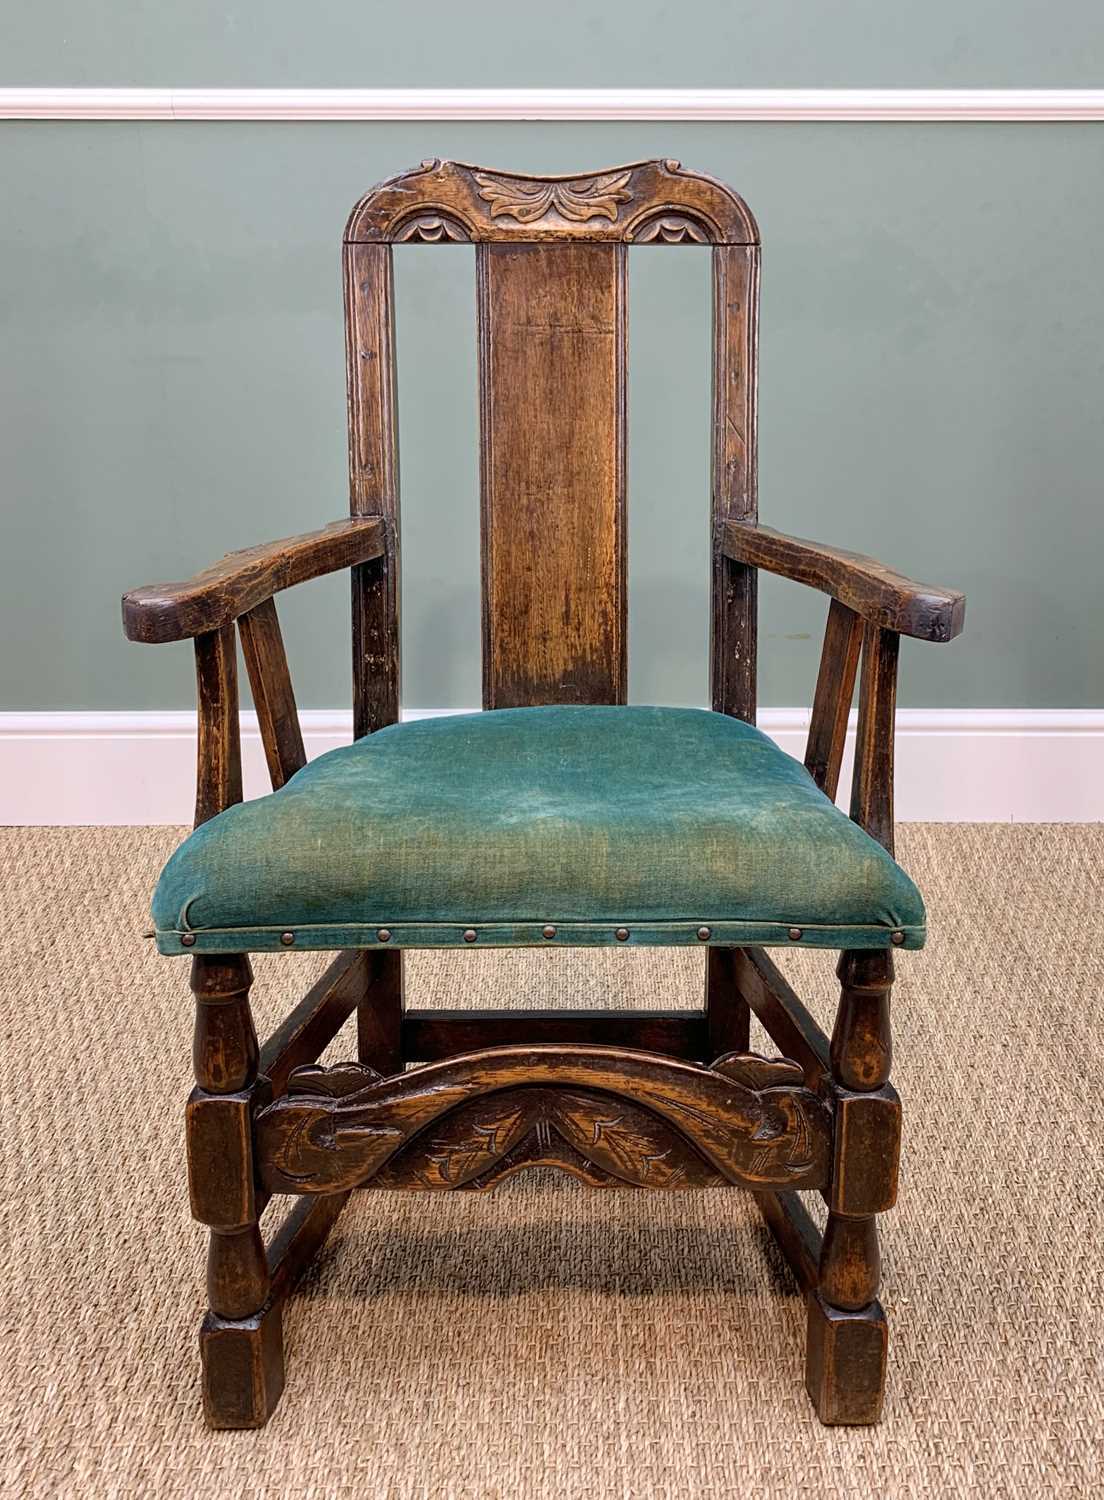 RARE WELSH JOINED OAK CHILD'S ARMCHAIR early 18th Century and later, believed Carmarthenshire,